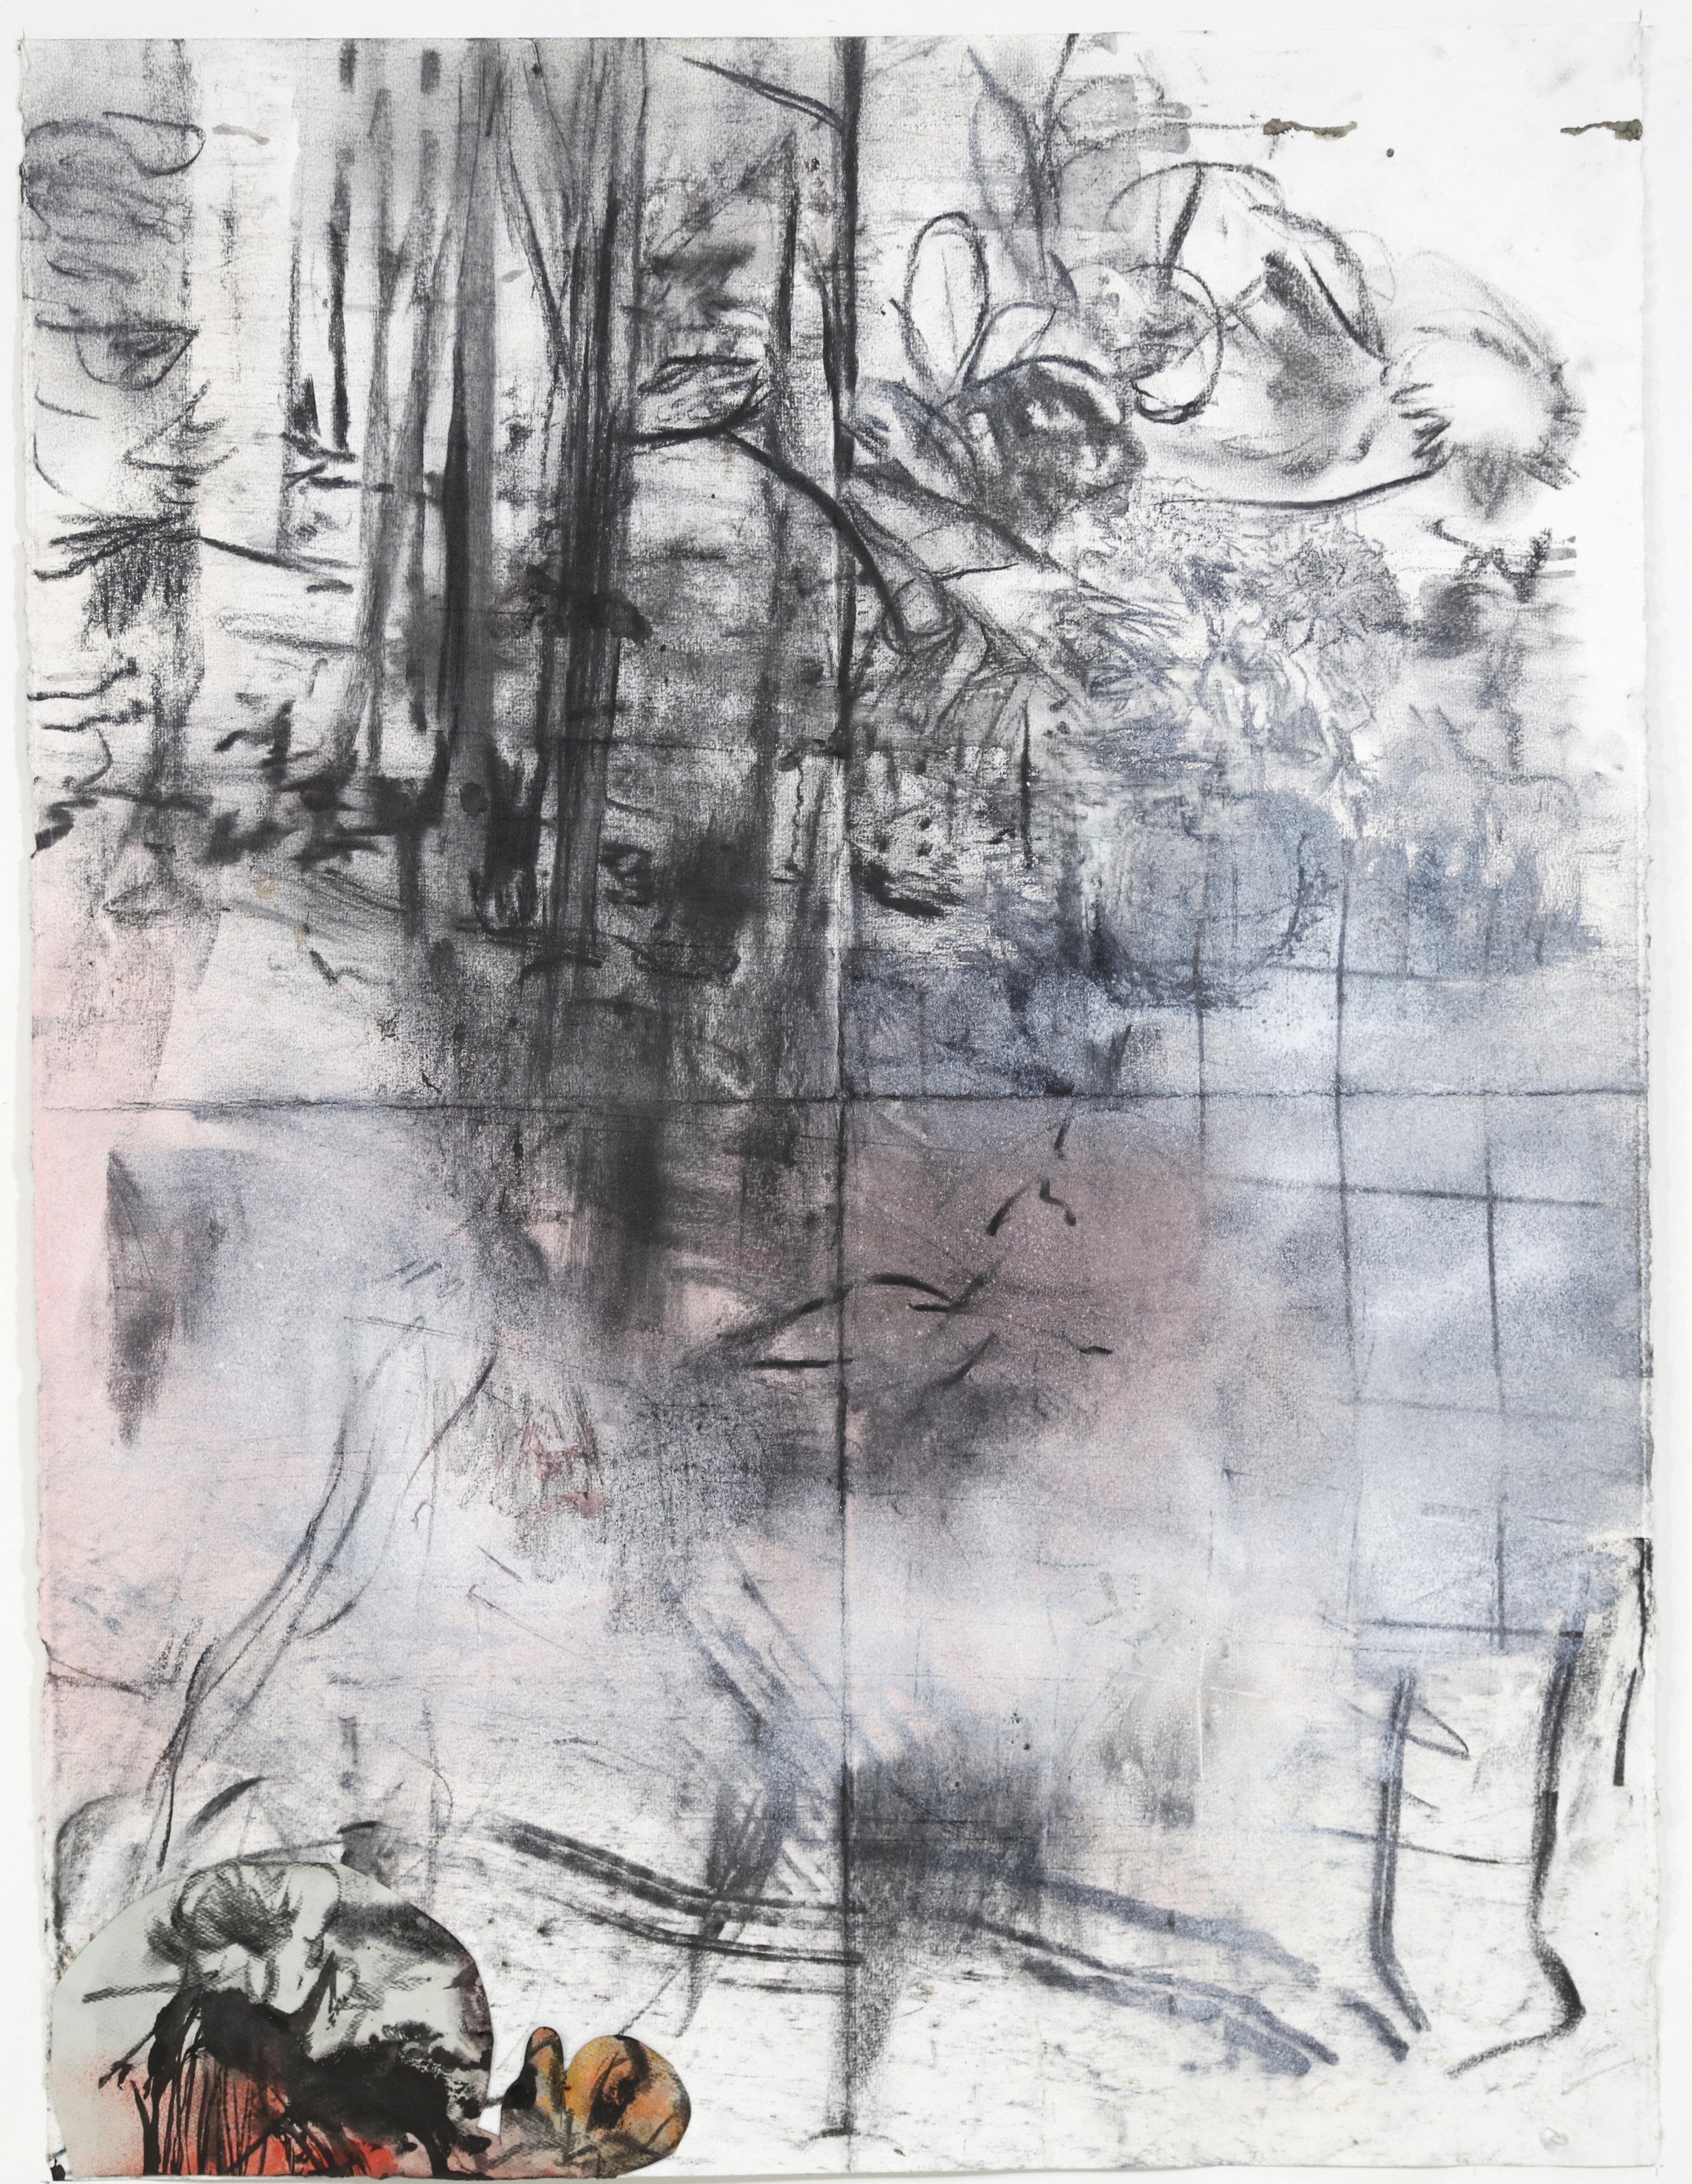  Bedrock, 2022, mixed media on paper, 30 x 22 ½ inches 